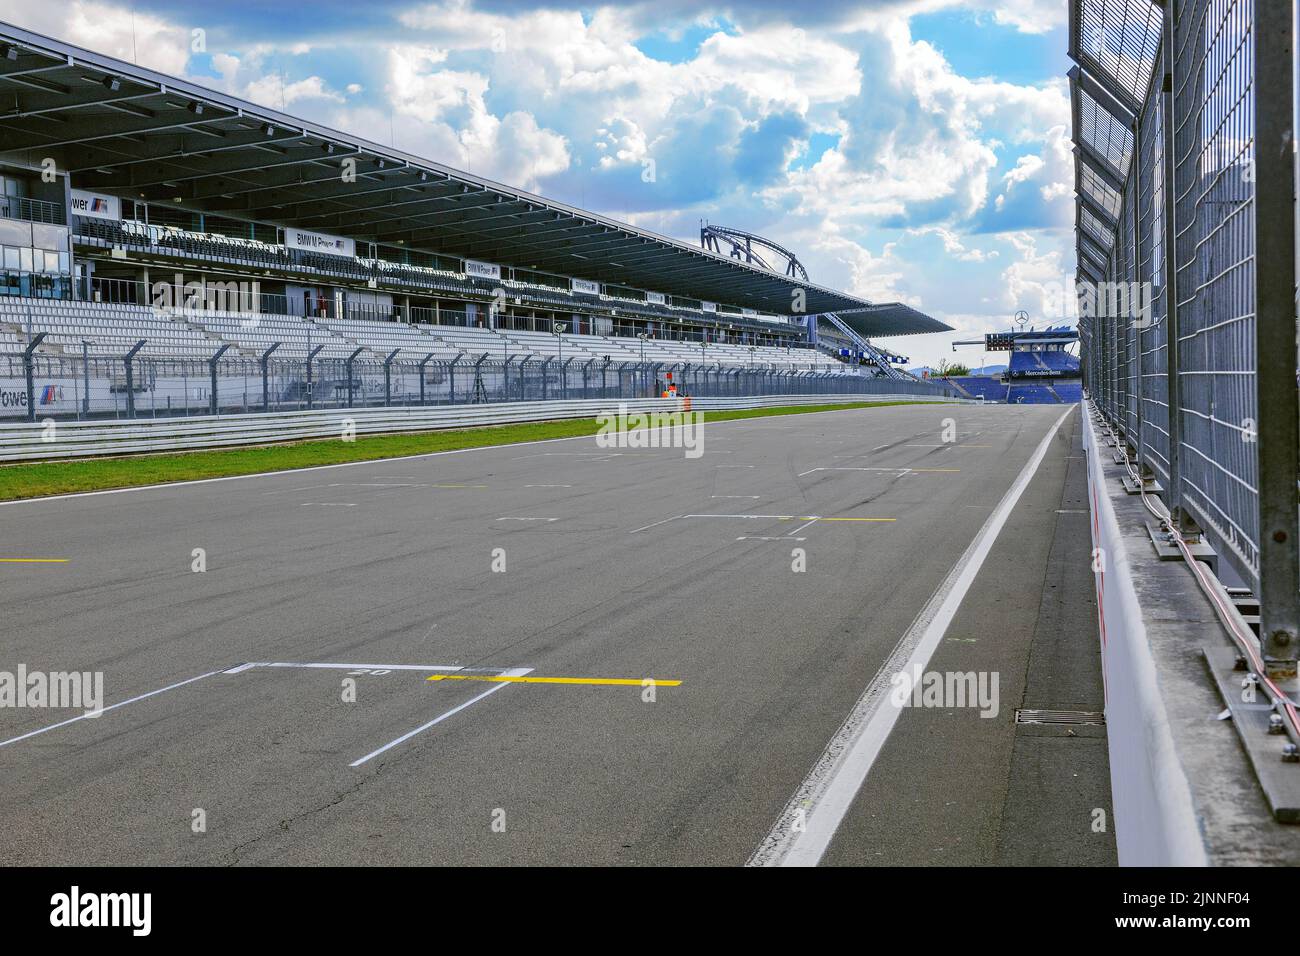 View through security fence from pit lane to empty start-finish straight grid lane with markings for start position, main grandstand on left Stock Photo